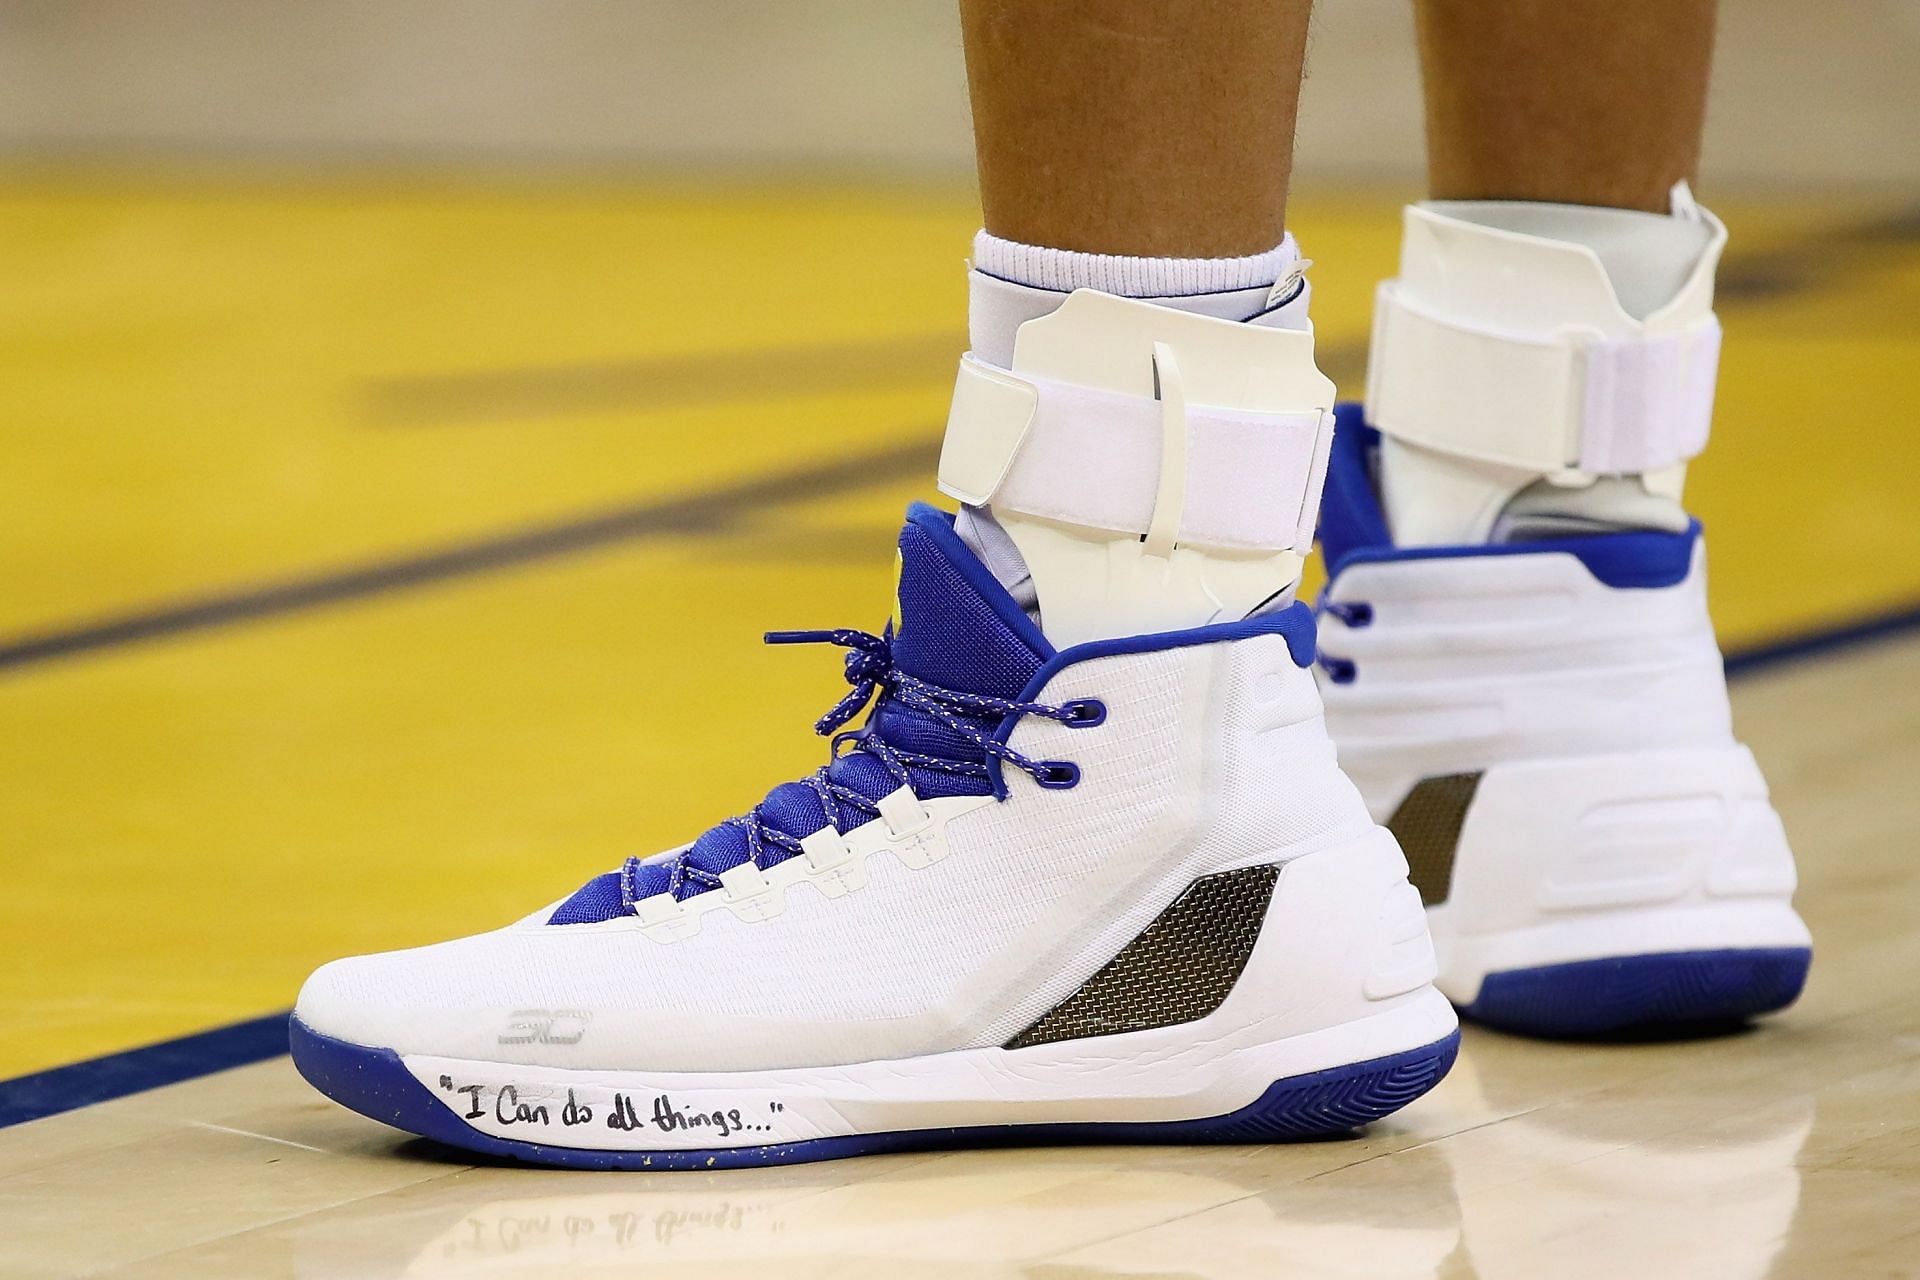 Steph Curry wearing the Curry 3s against the Miami Heat